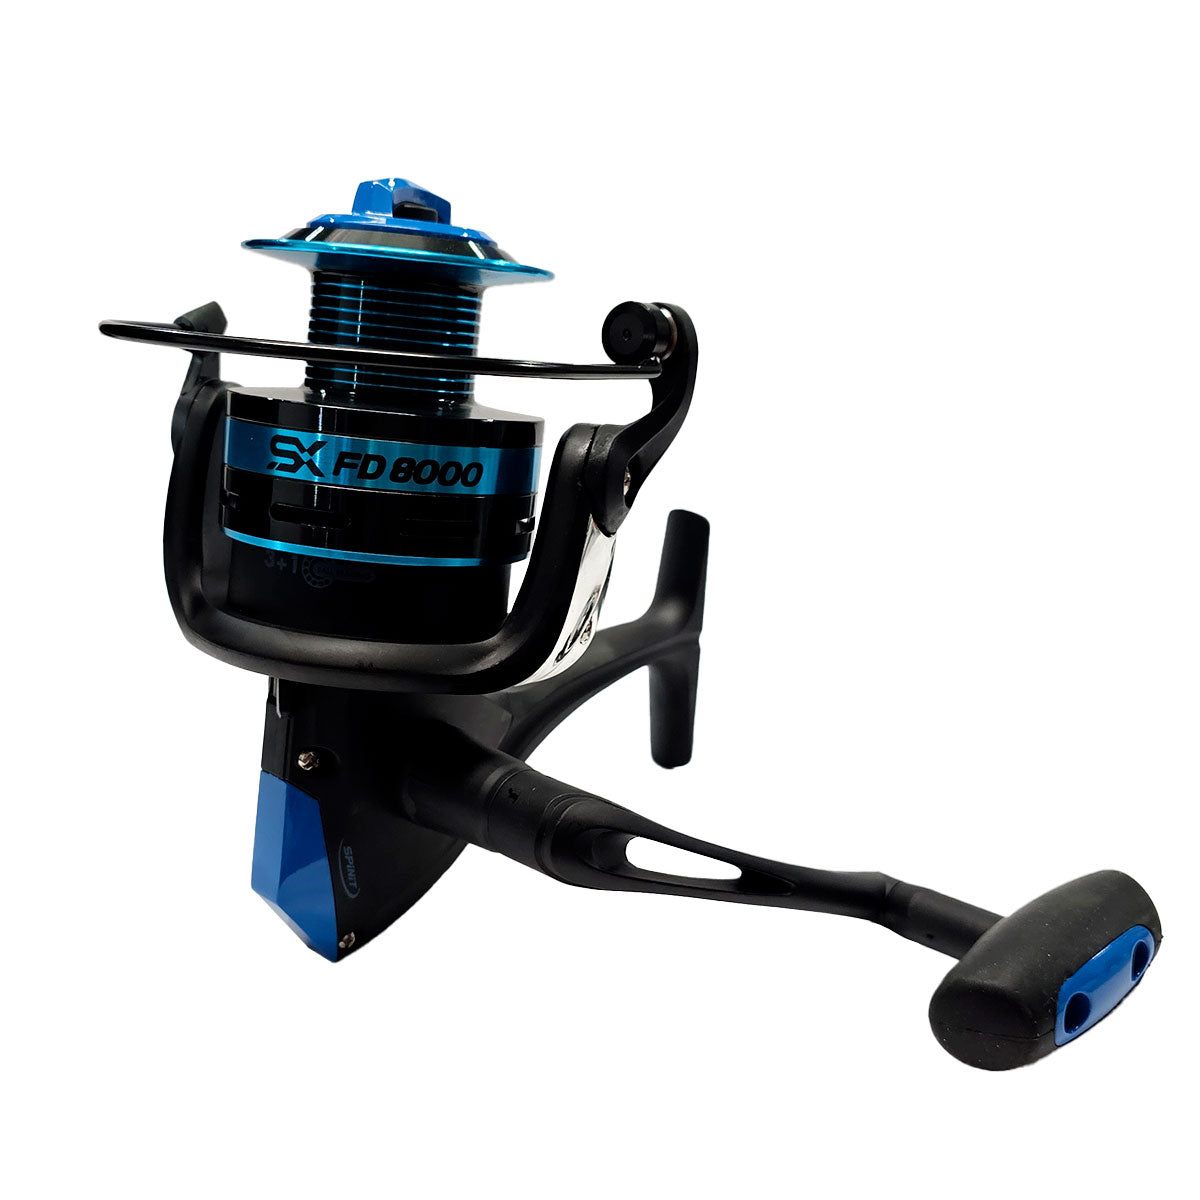 Reel Spinit SX FD 7000 - ESQUEL ANGLERS